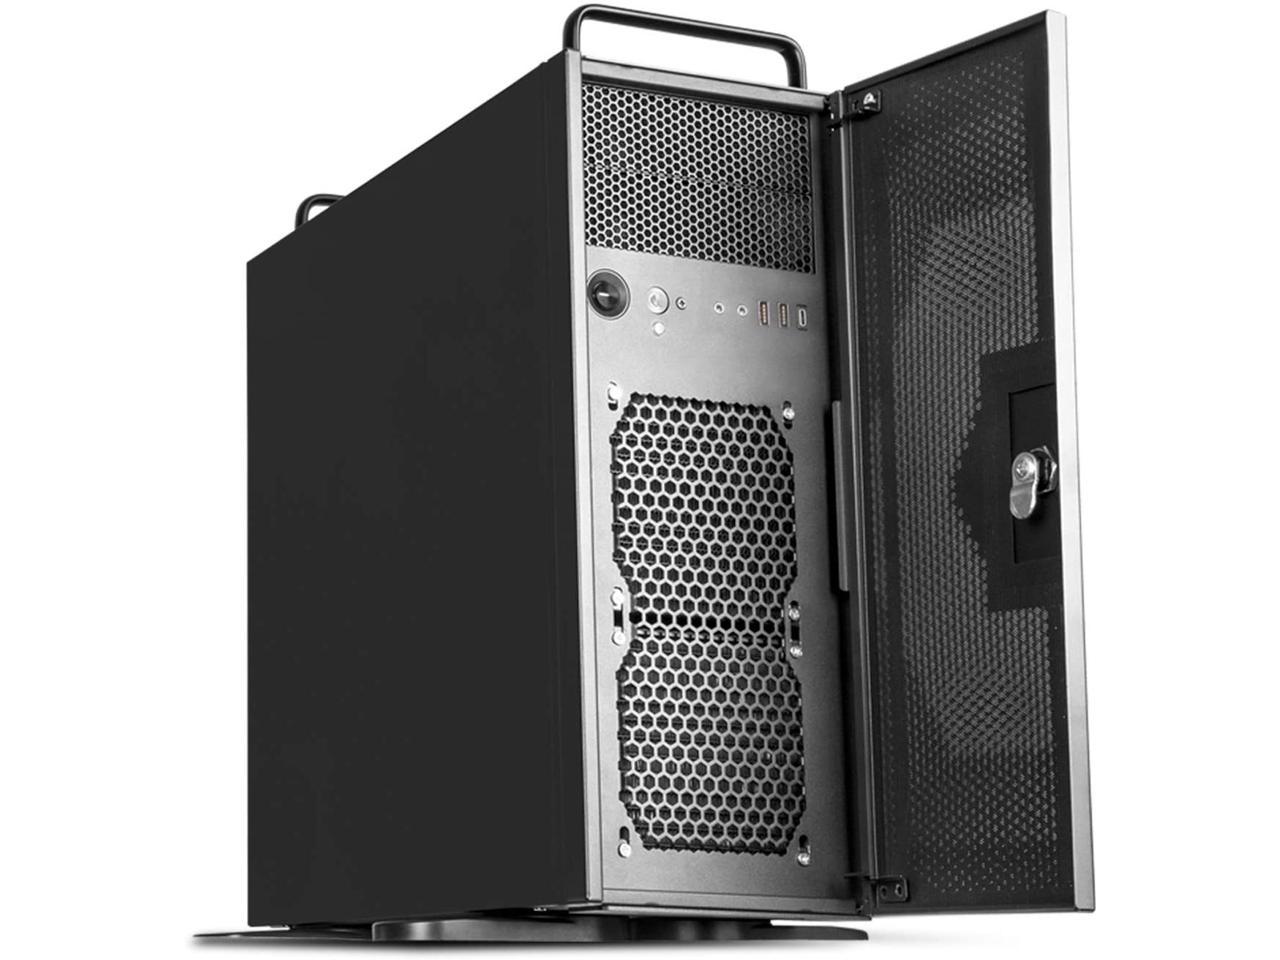 Silverstone RM42-502 4U rackmount Server Chassis with Liquid